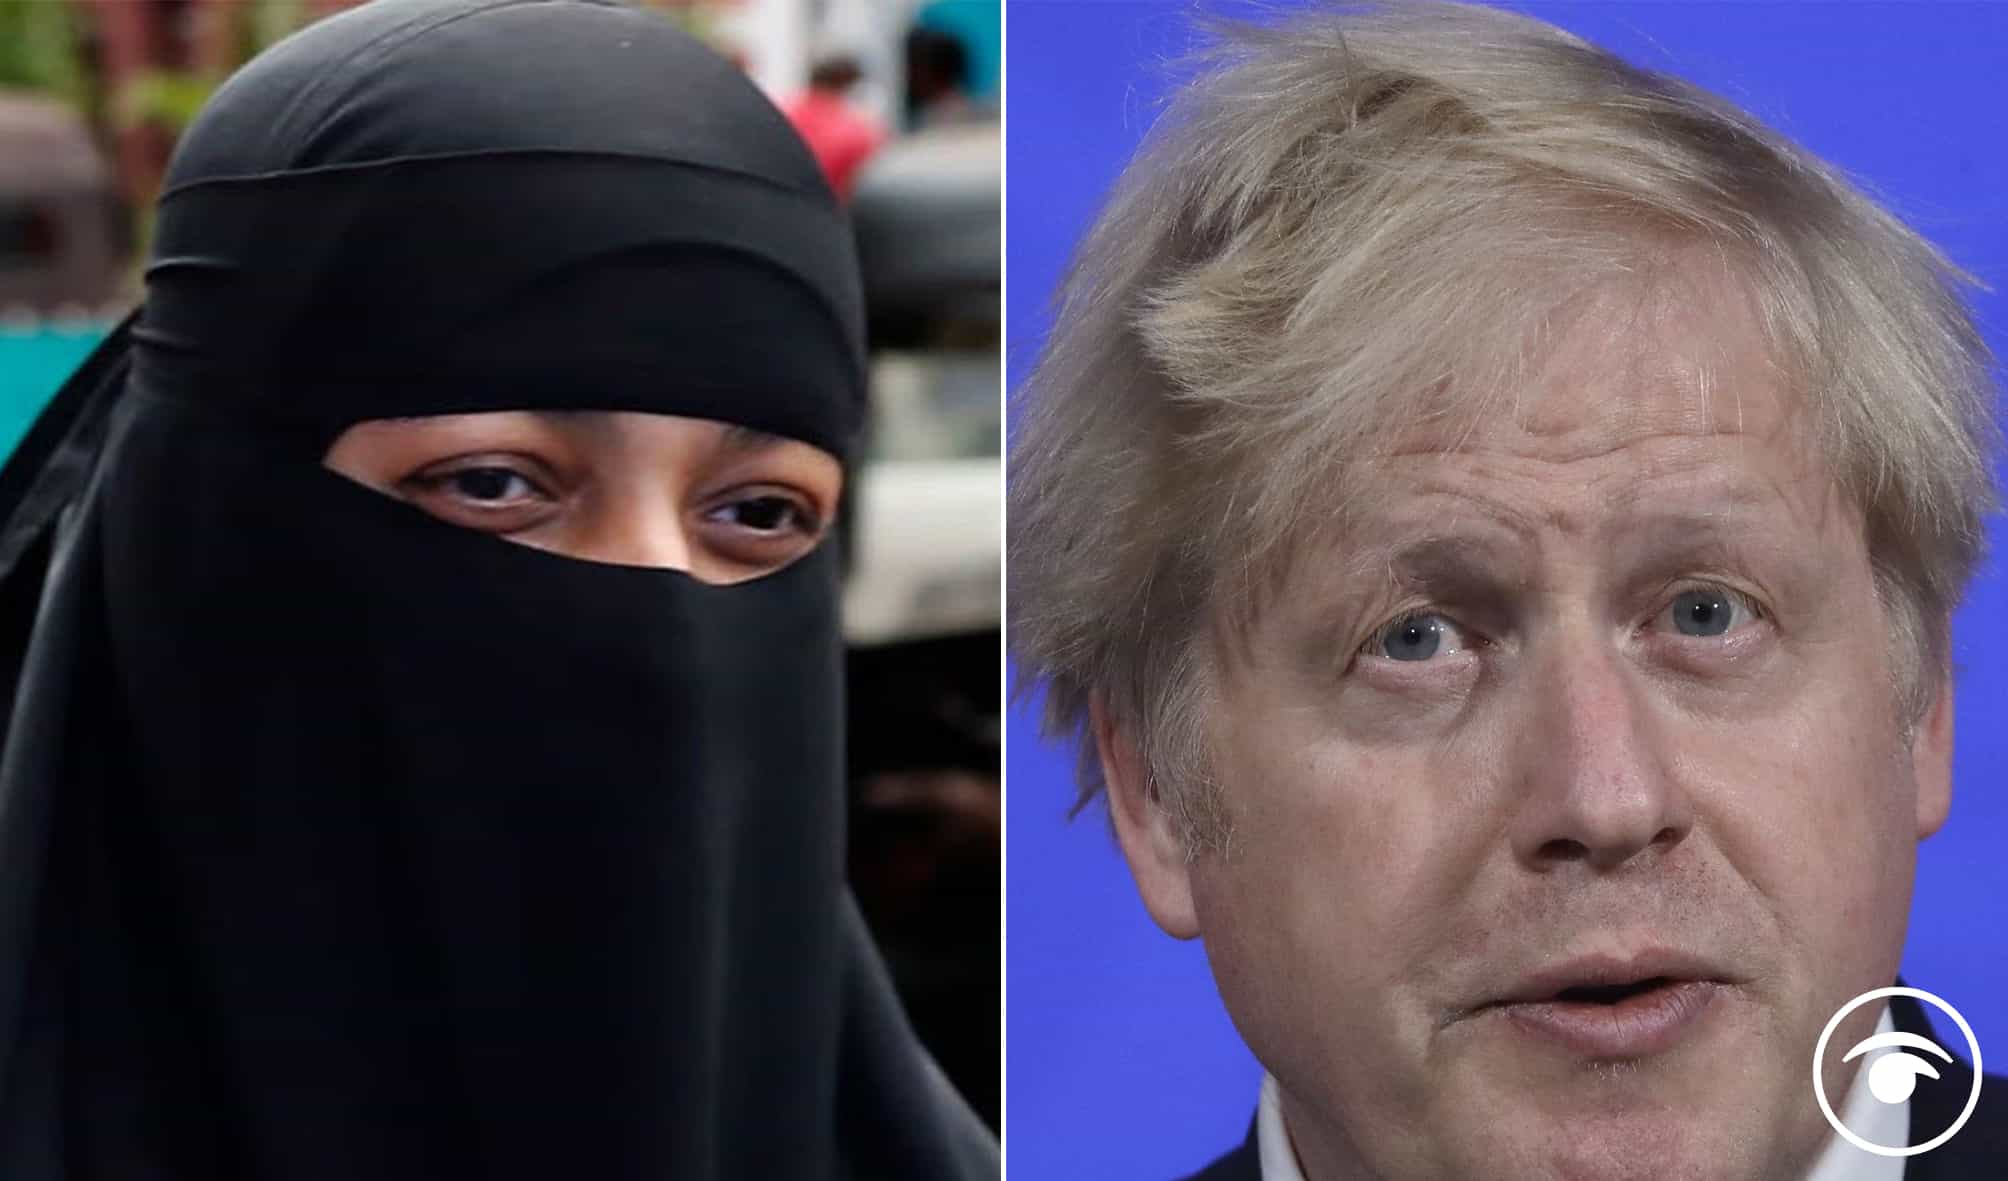 Anti-Muslim sentiment ‘remains a problem’ in Tory party and PM’s burka comment specifically called out